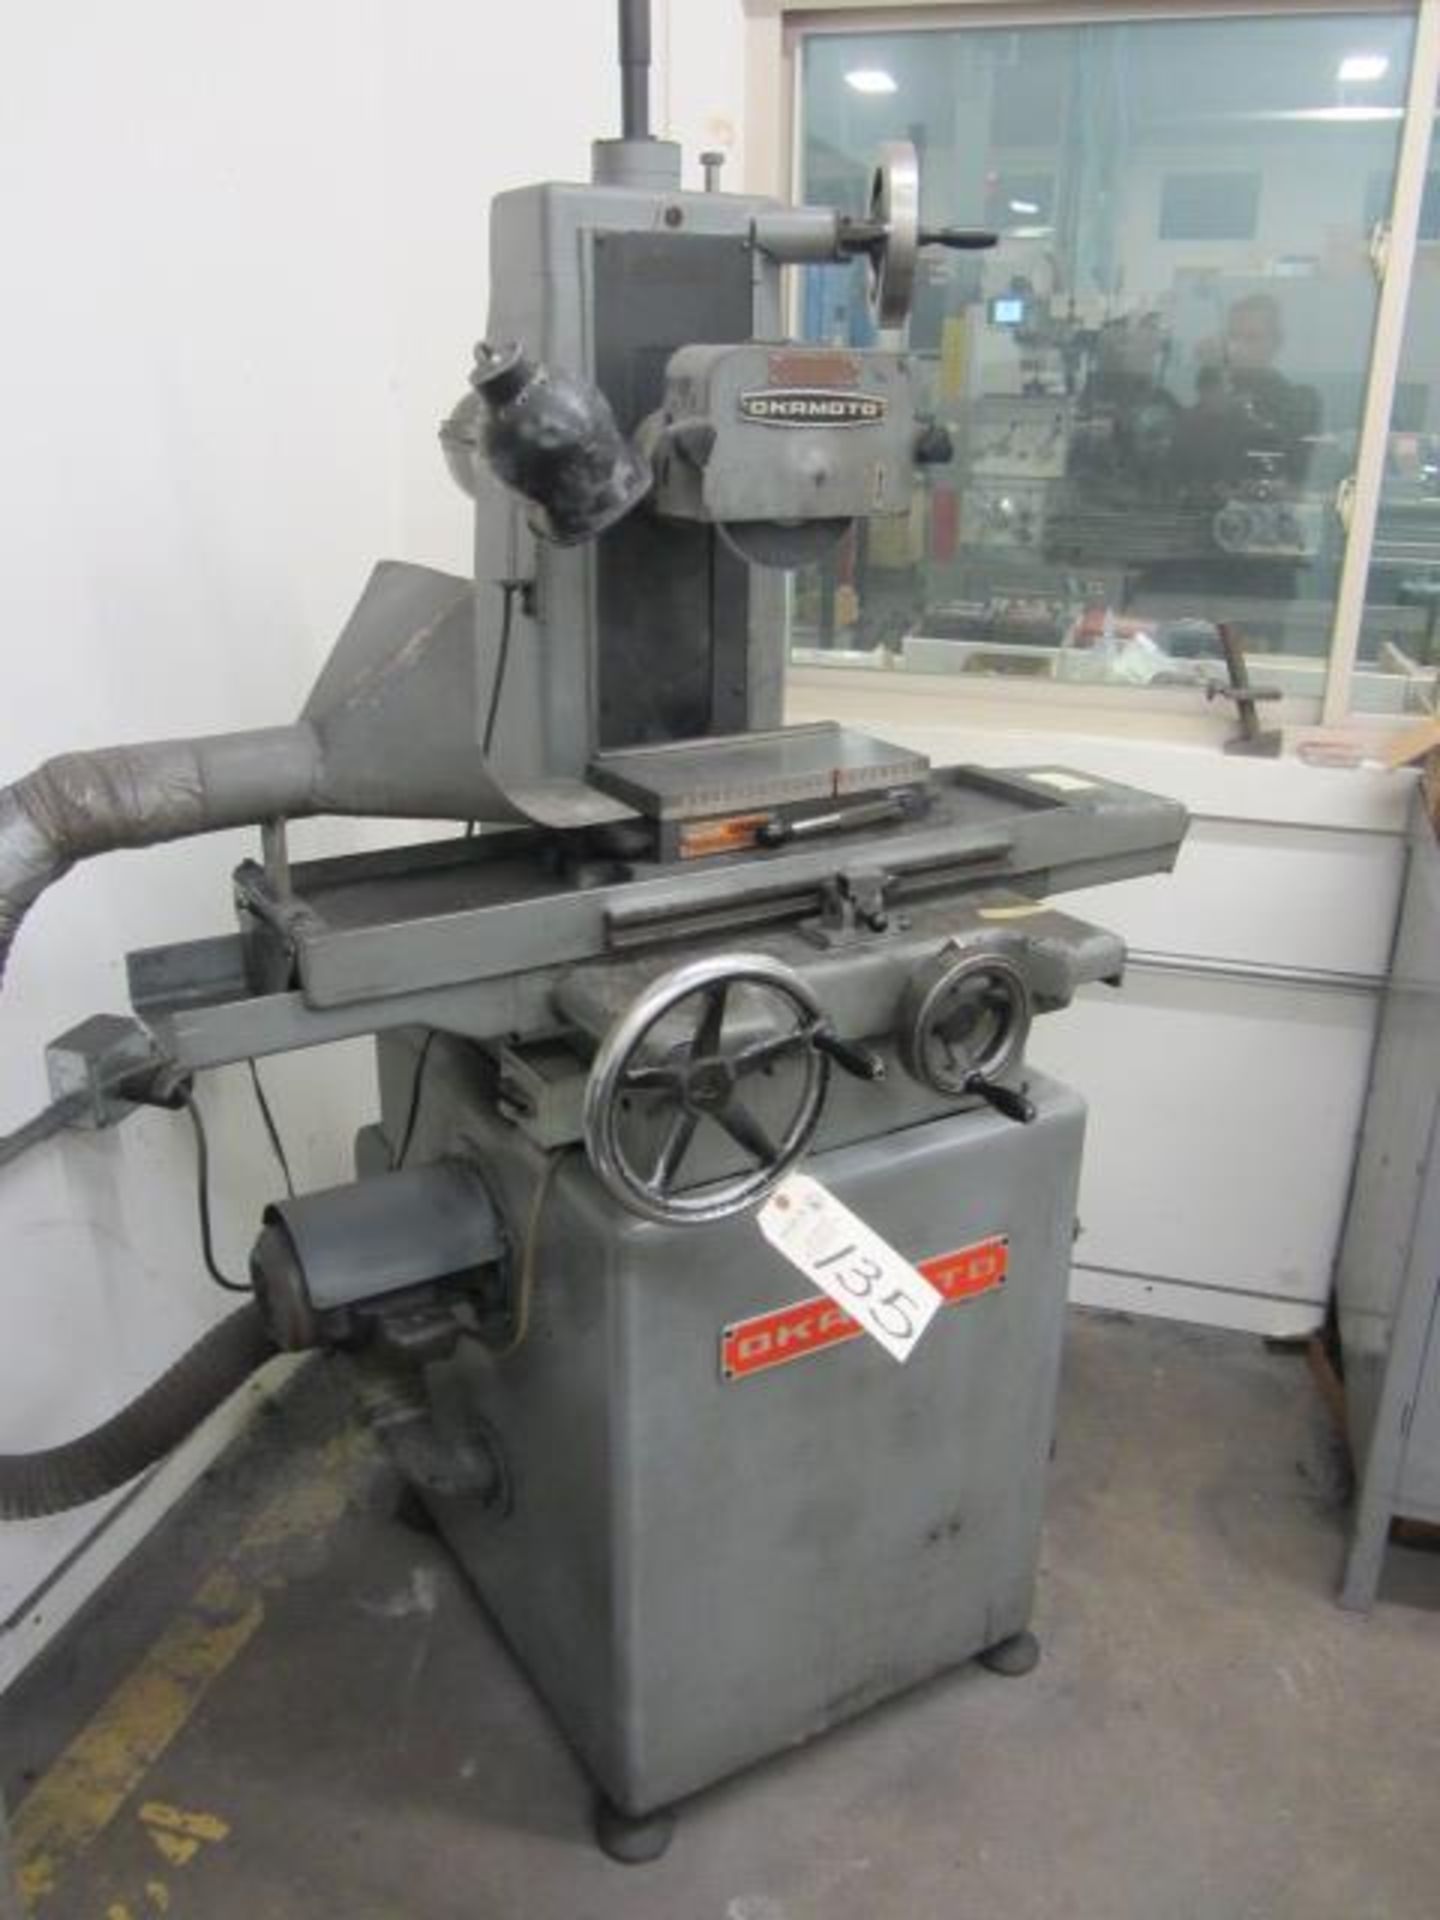 Okamoto OMA-350 6'' x 12'' Hand Feed Surface Grinder with Permanent Magnetic Chuck, sn:1625 - Image 5 of 5